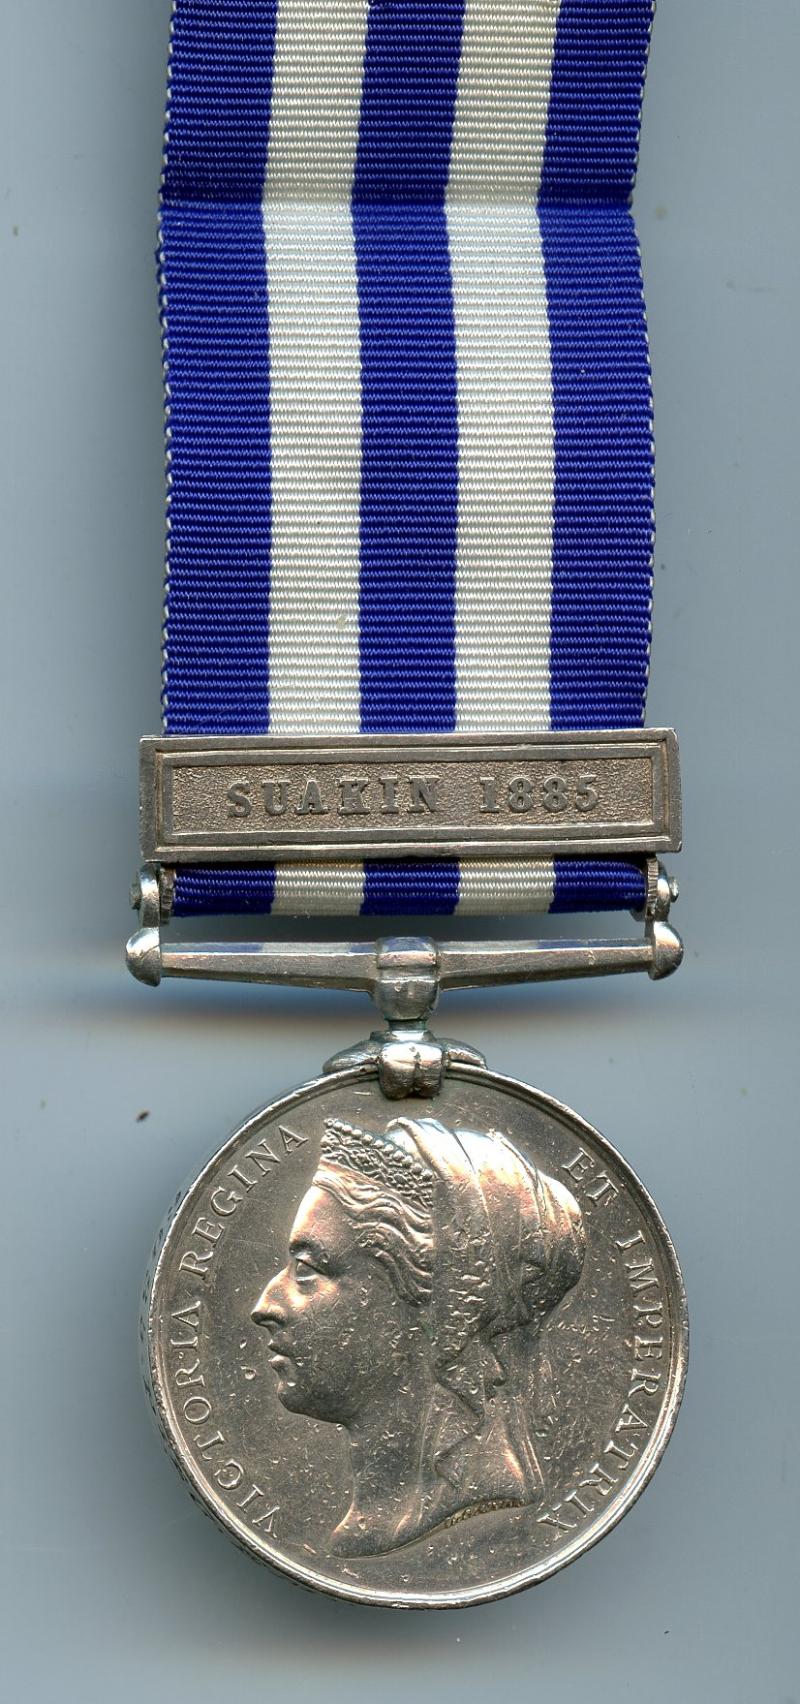 Egypt Medal 1882 : 1 Clasp  Suakin 1885; Pte George Emslie, 2nd Bn Scots Guards